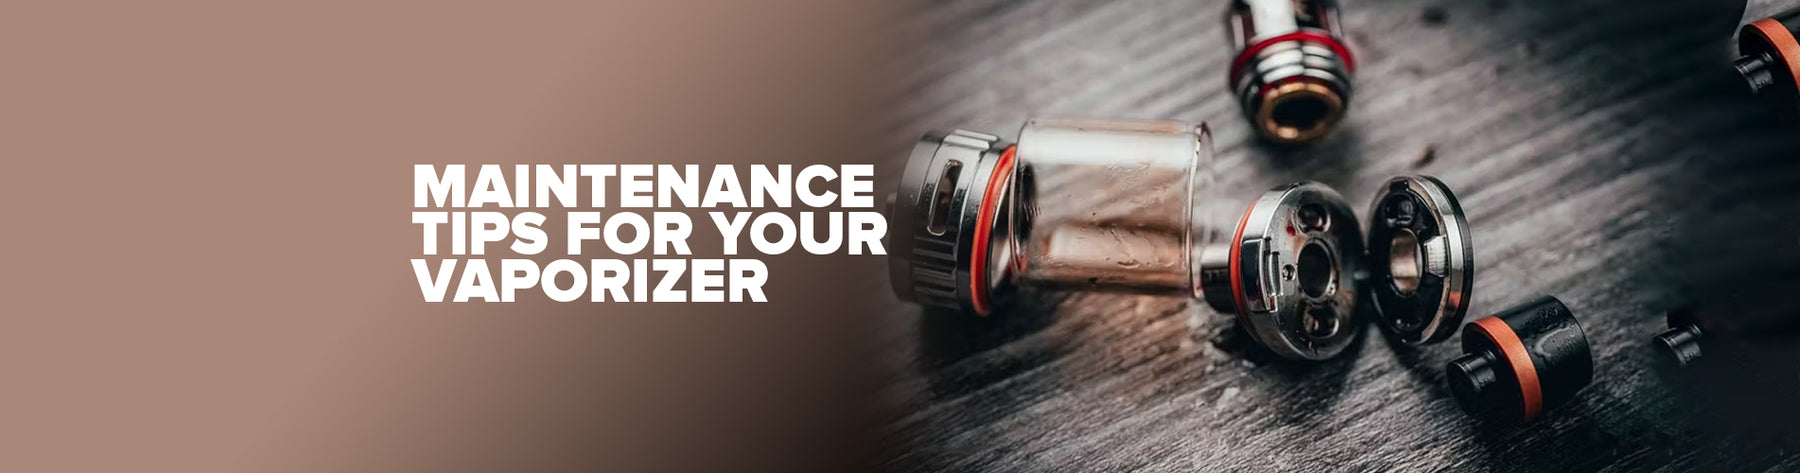 Tips For Care And Maintenance Of Your Vaporizer